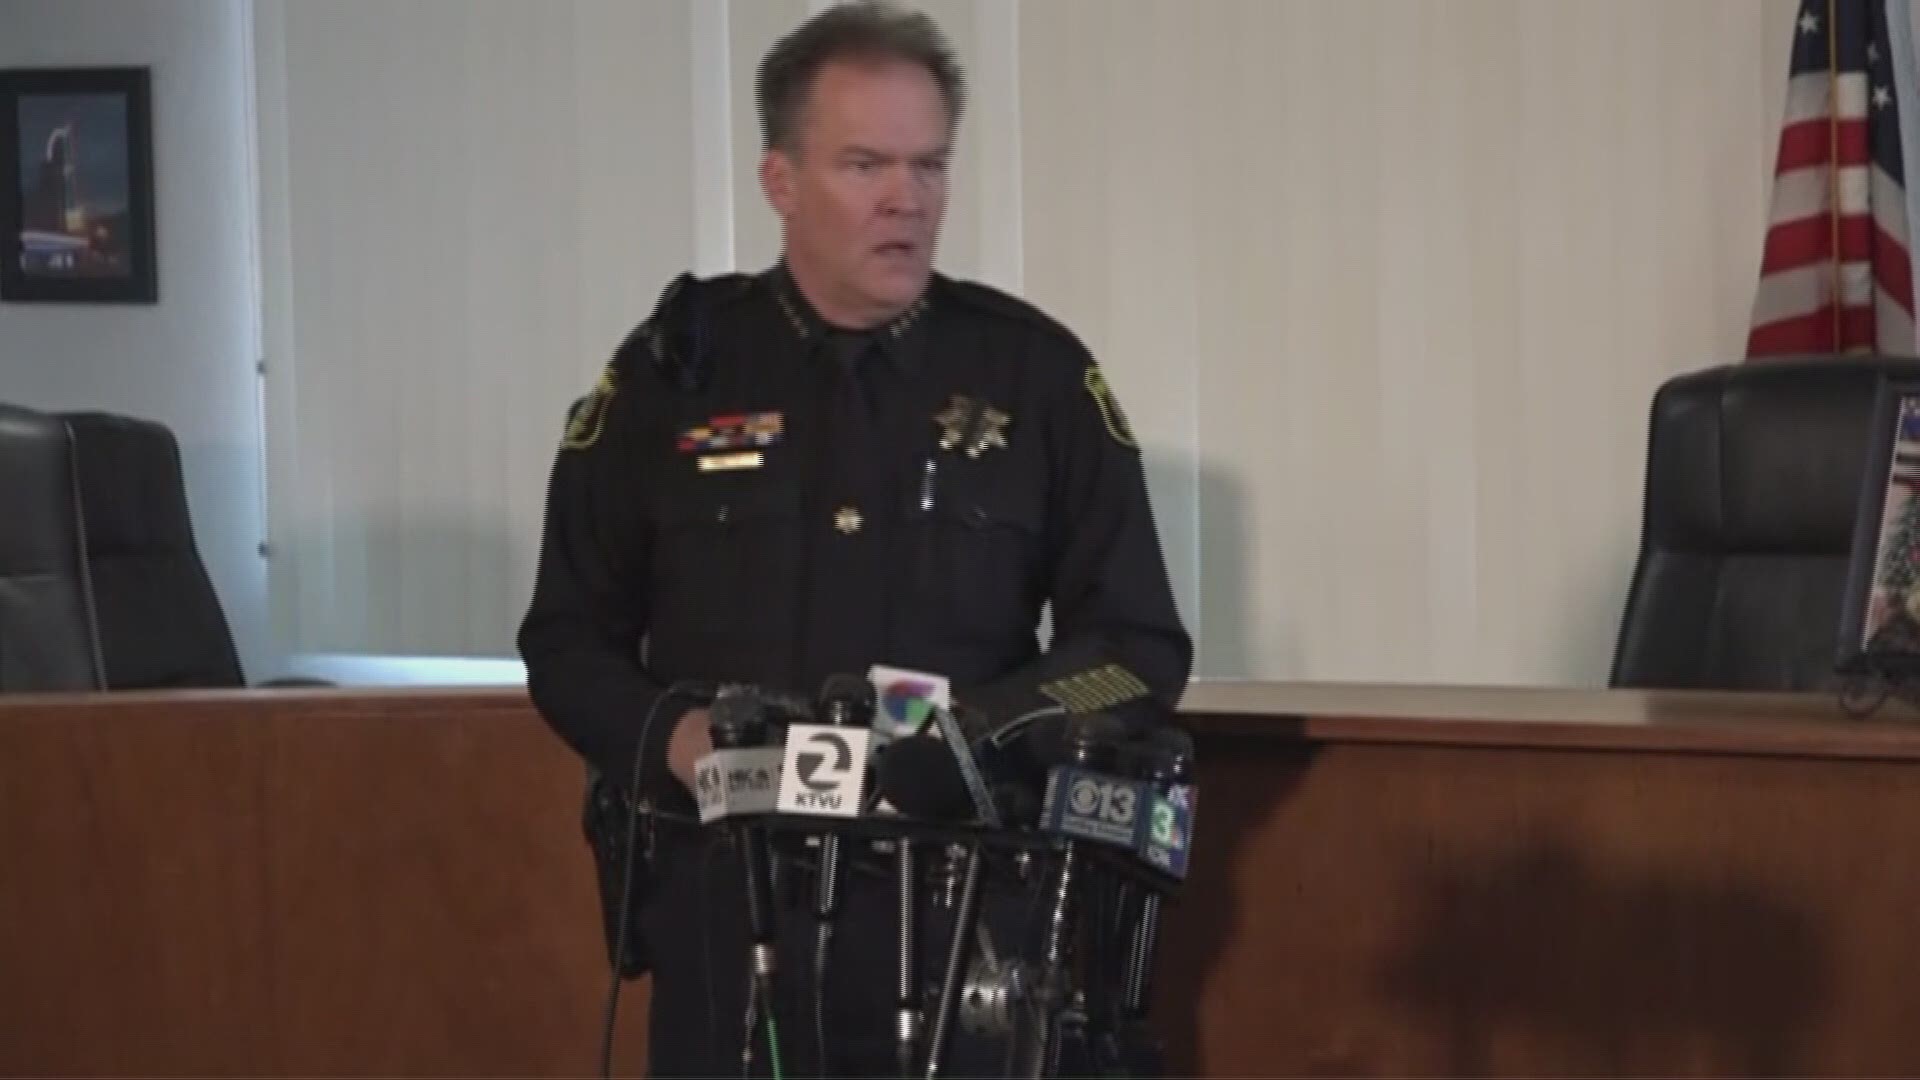 RAW: Press Conference gives the latest details into shooting death of Officer Ronil Singh